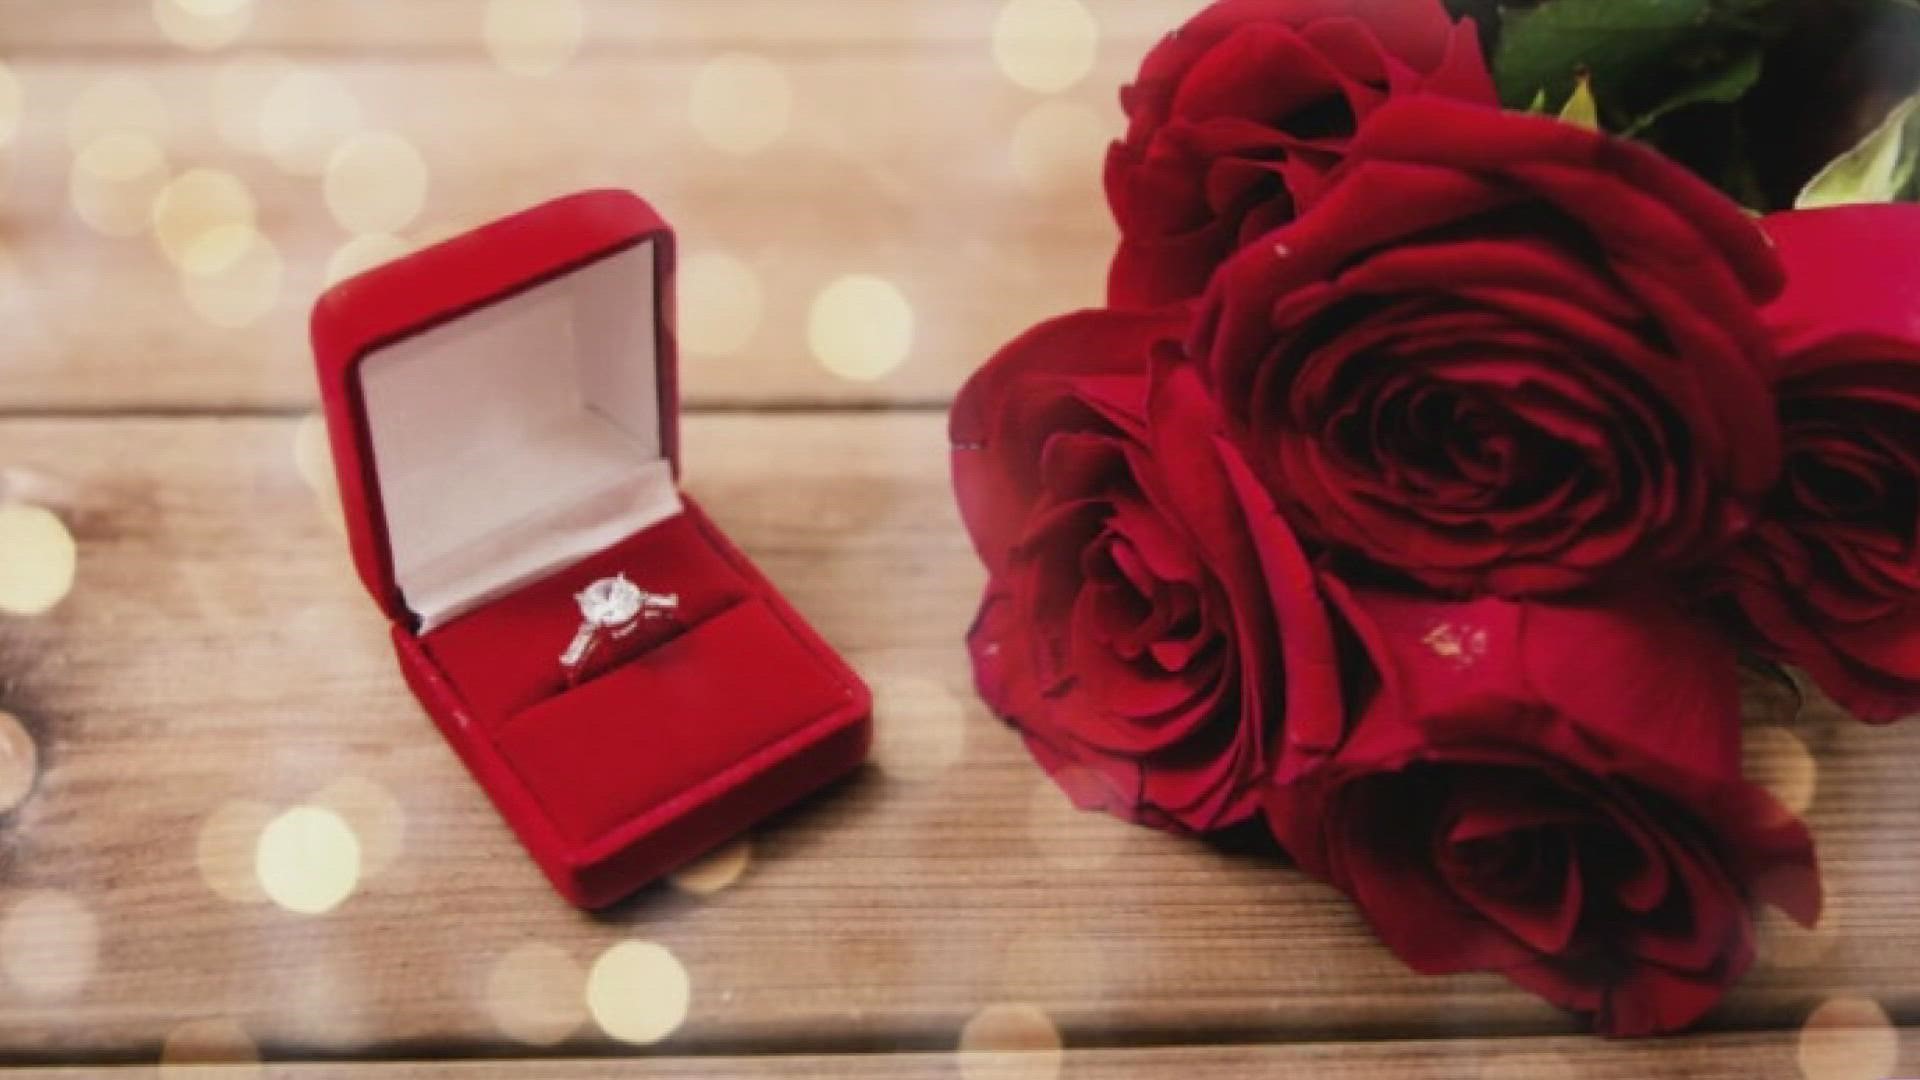 The holidays are a popular time for "popping the question." This morning, we have tips for the perfect holiday proposal